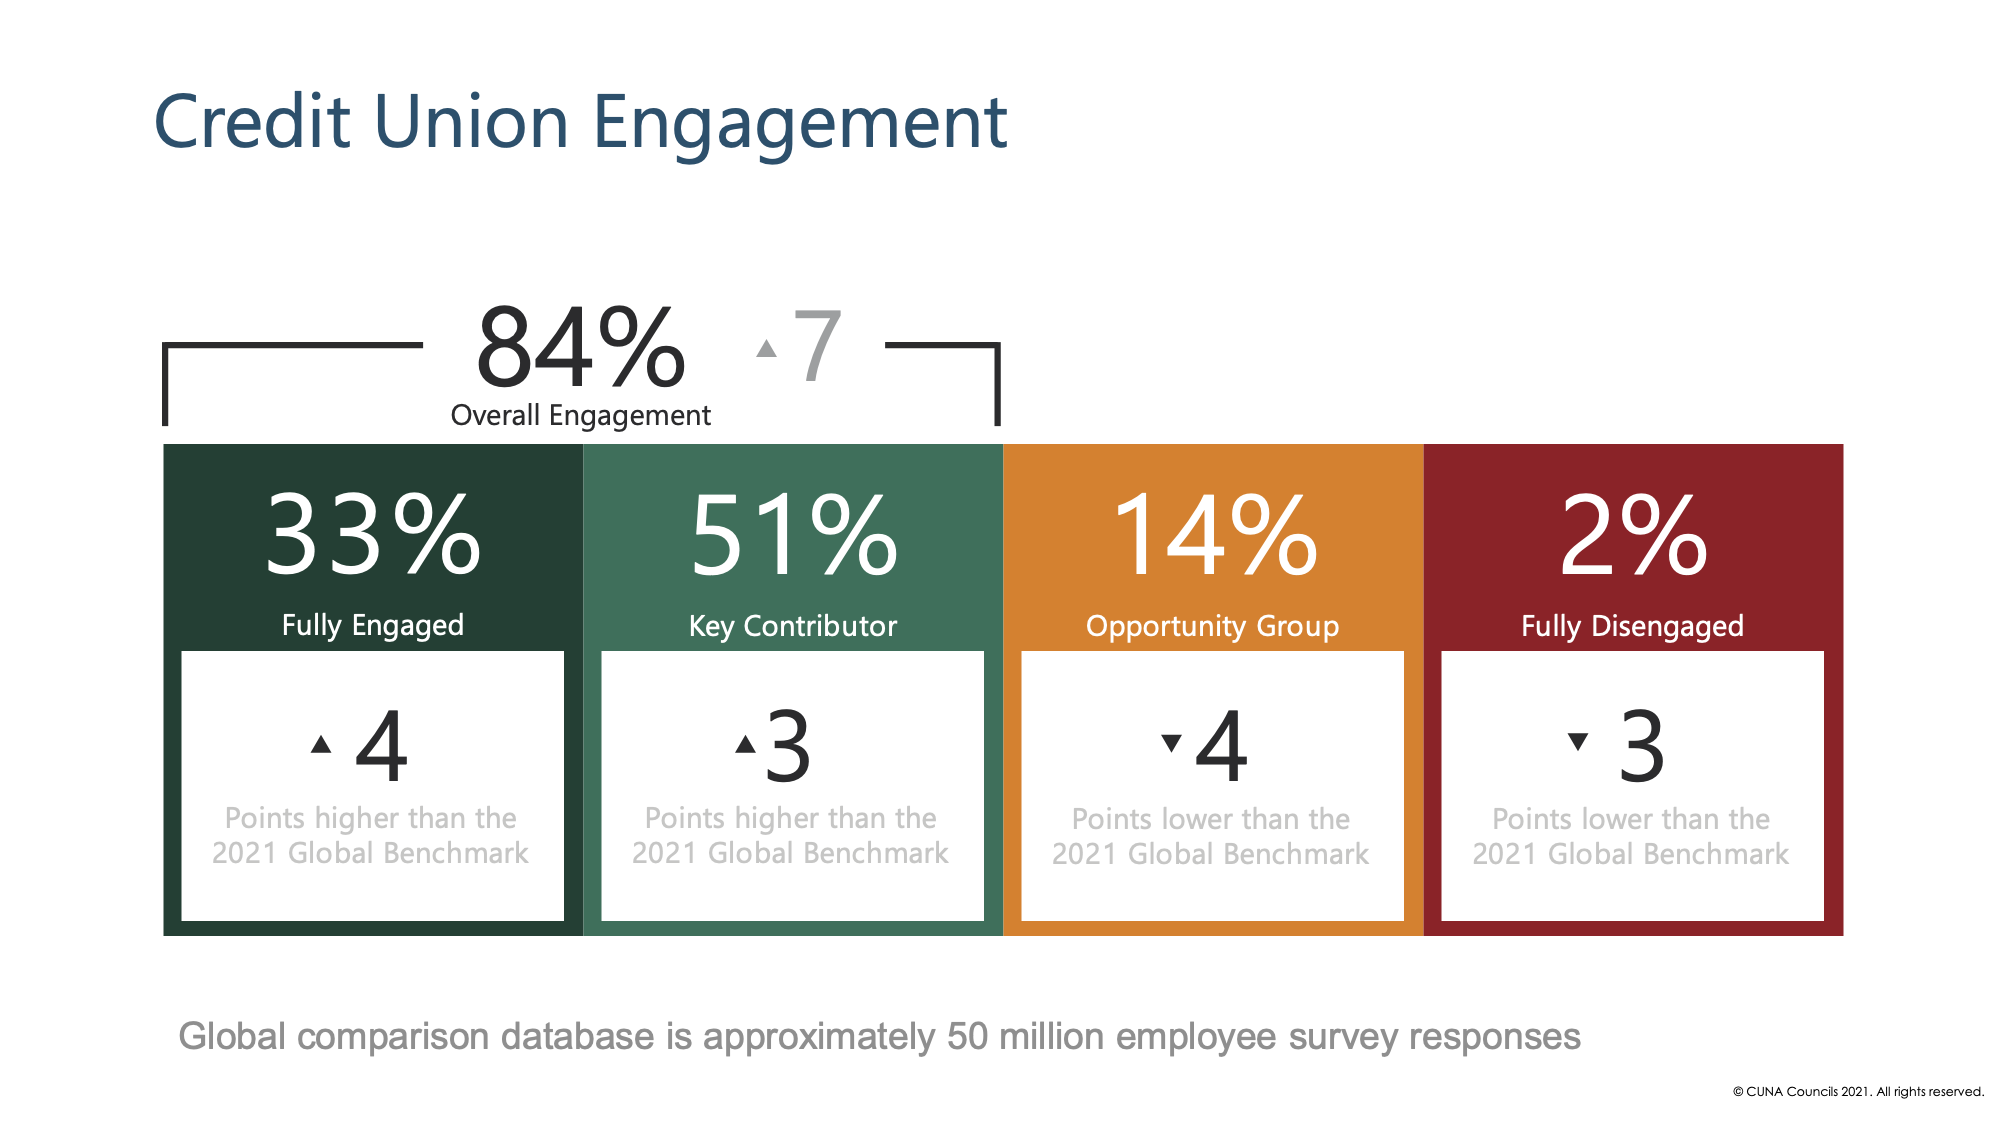 Overall, credit unions exceed industry benchmarks for employee engagement.